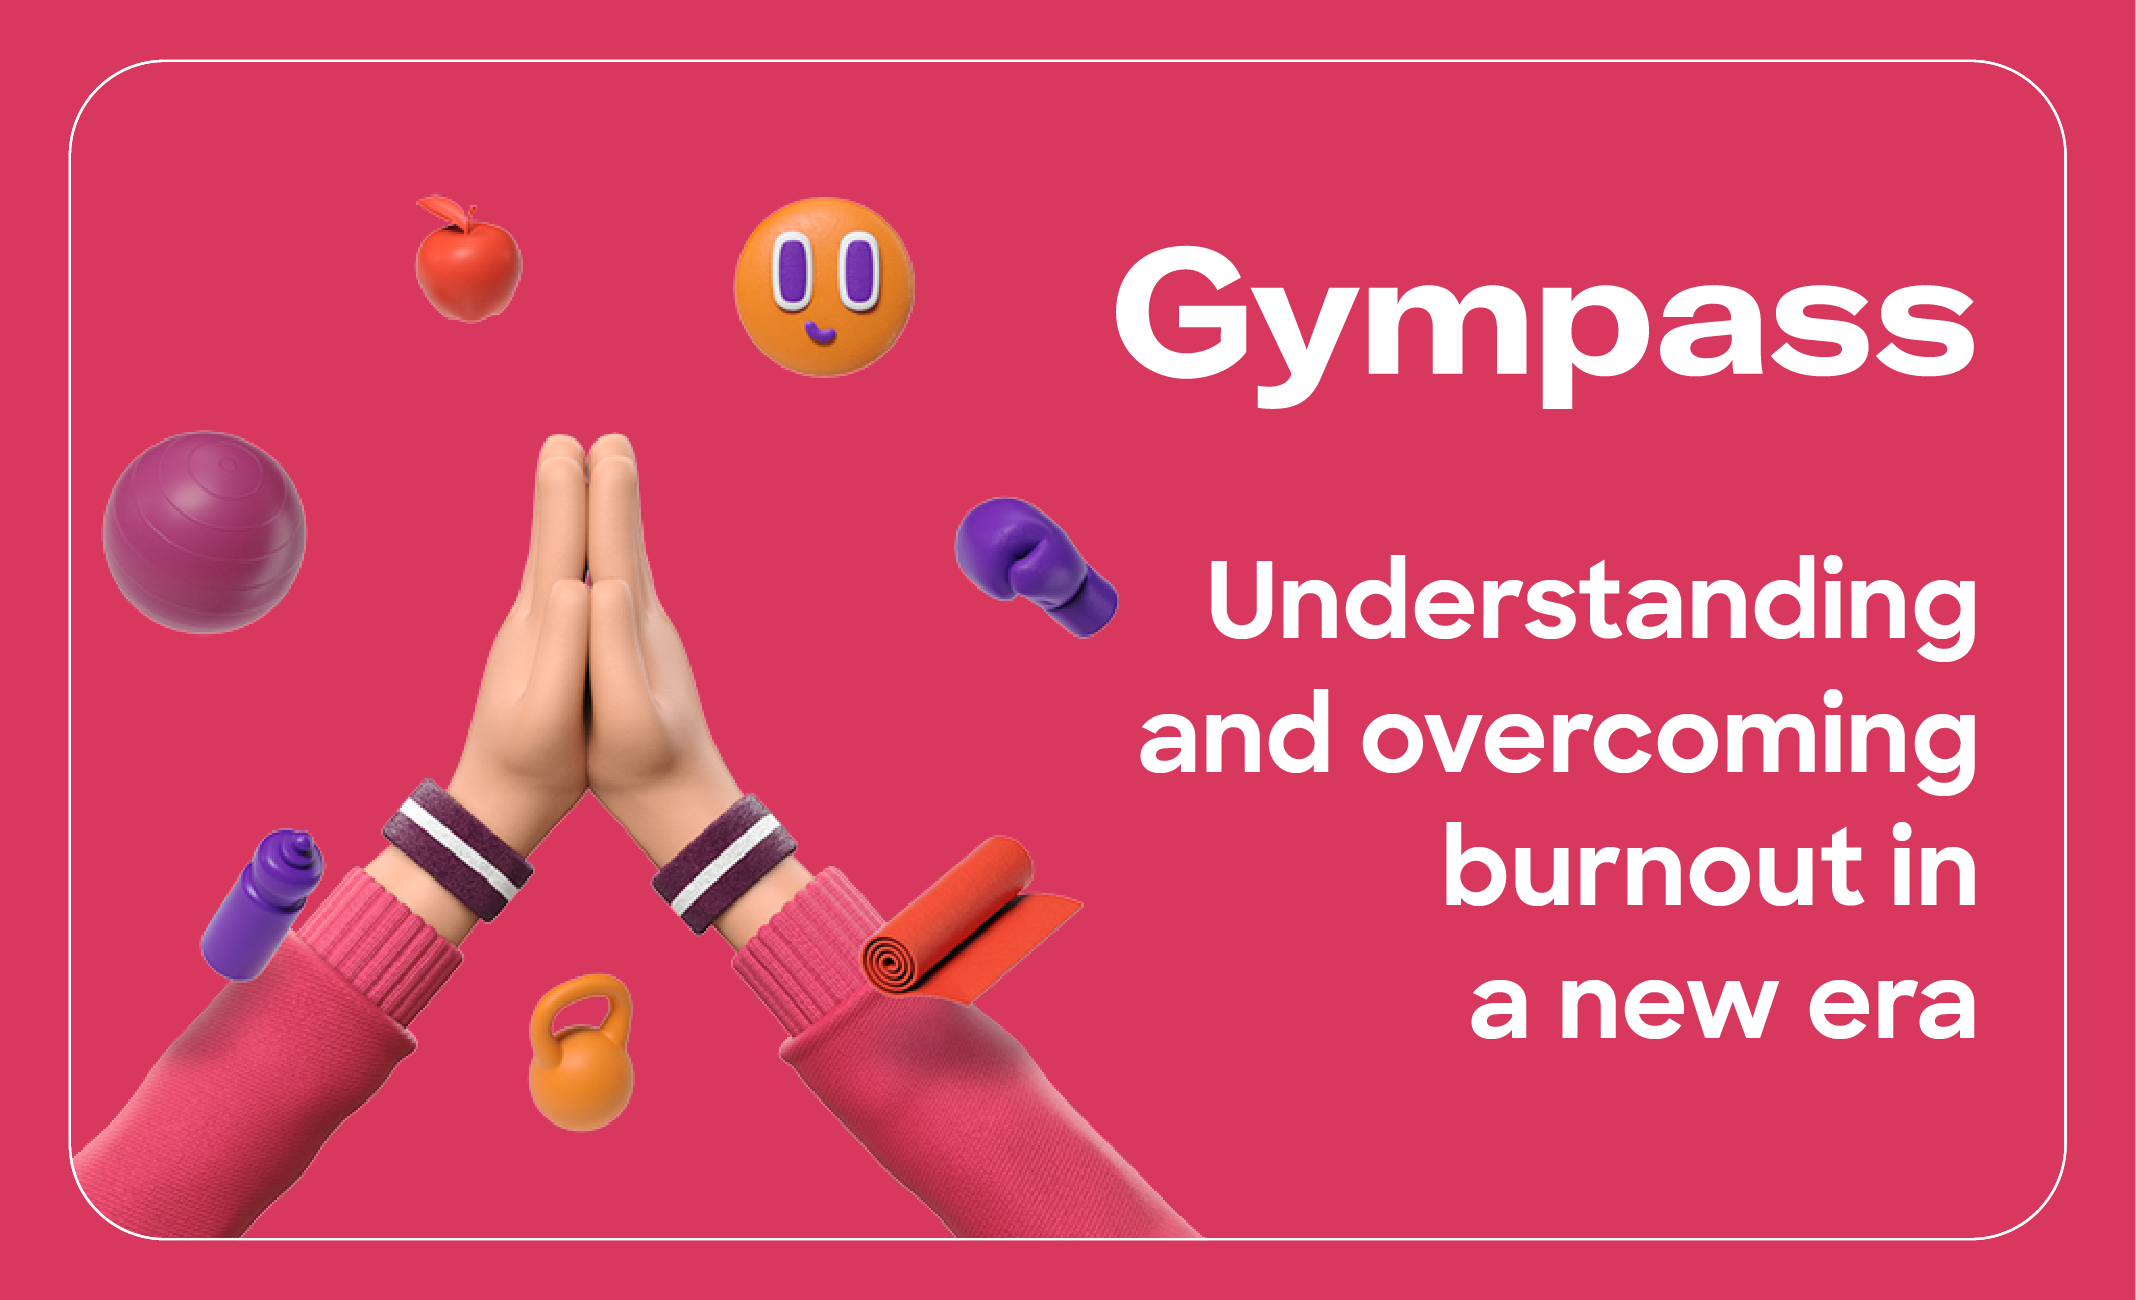 Gympass Guide: Understanding and overcoming burnout in a new era